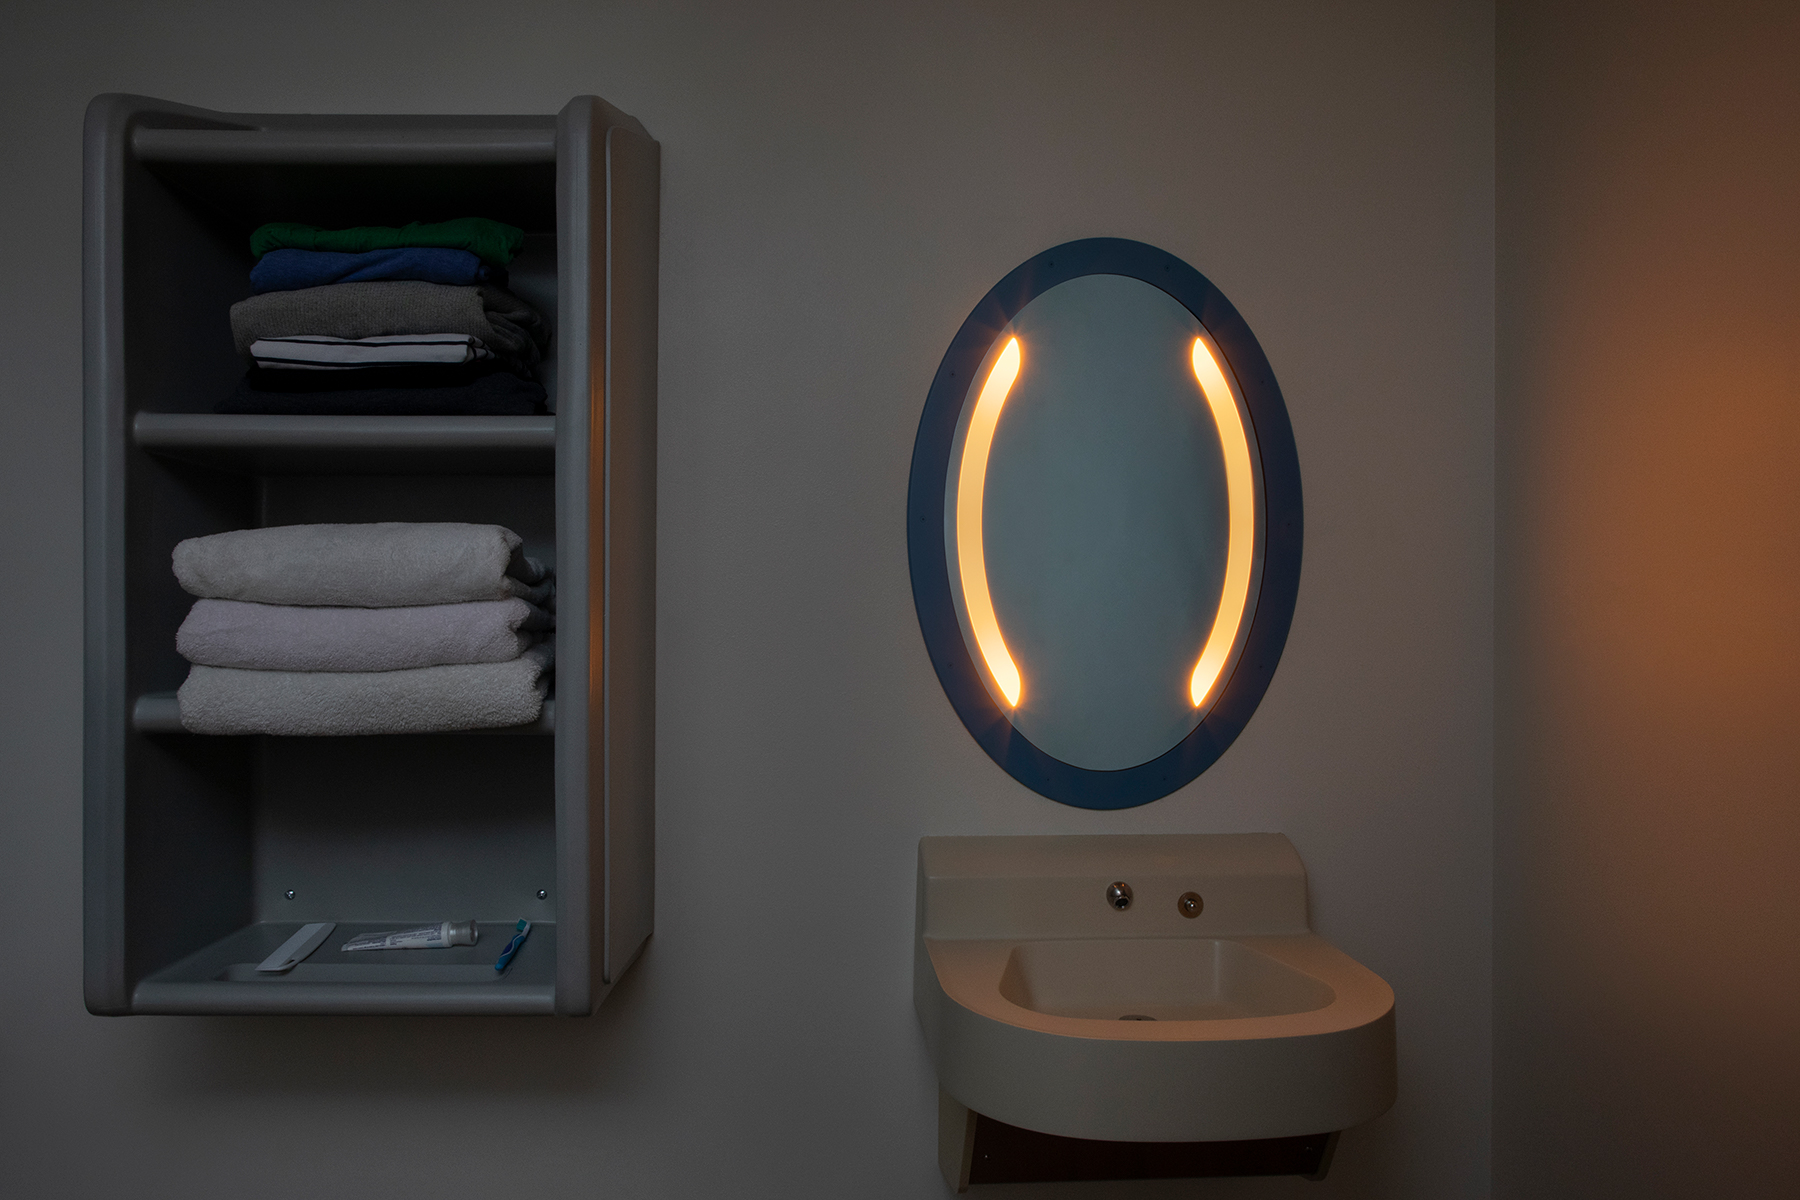 Sole oval illuminated mirror in a behavioral health bathroom with nightlight mode on